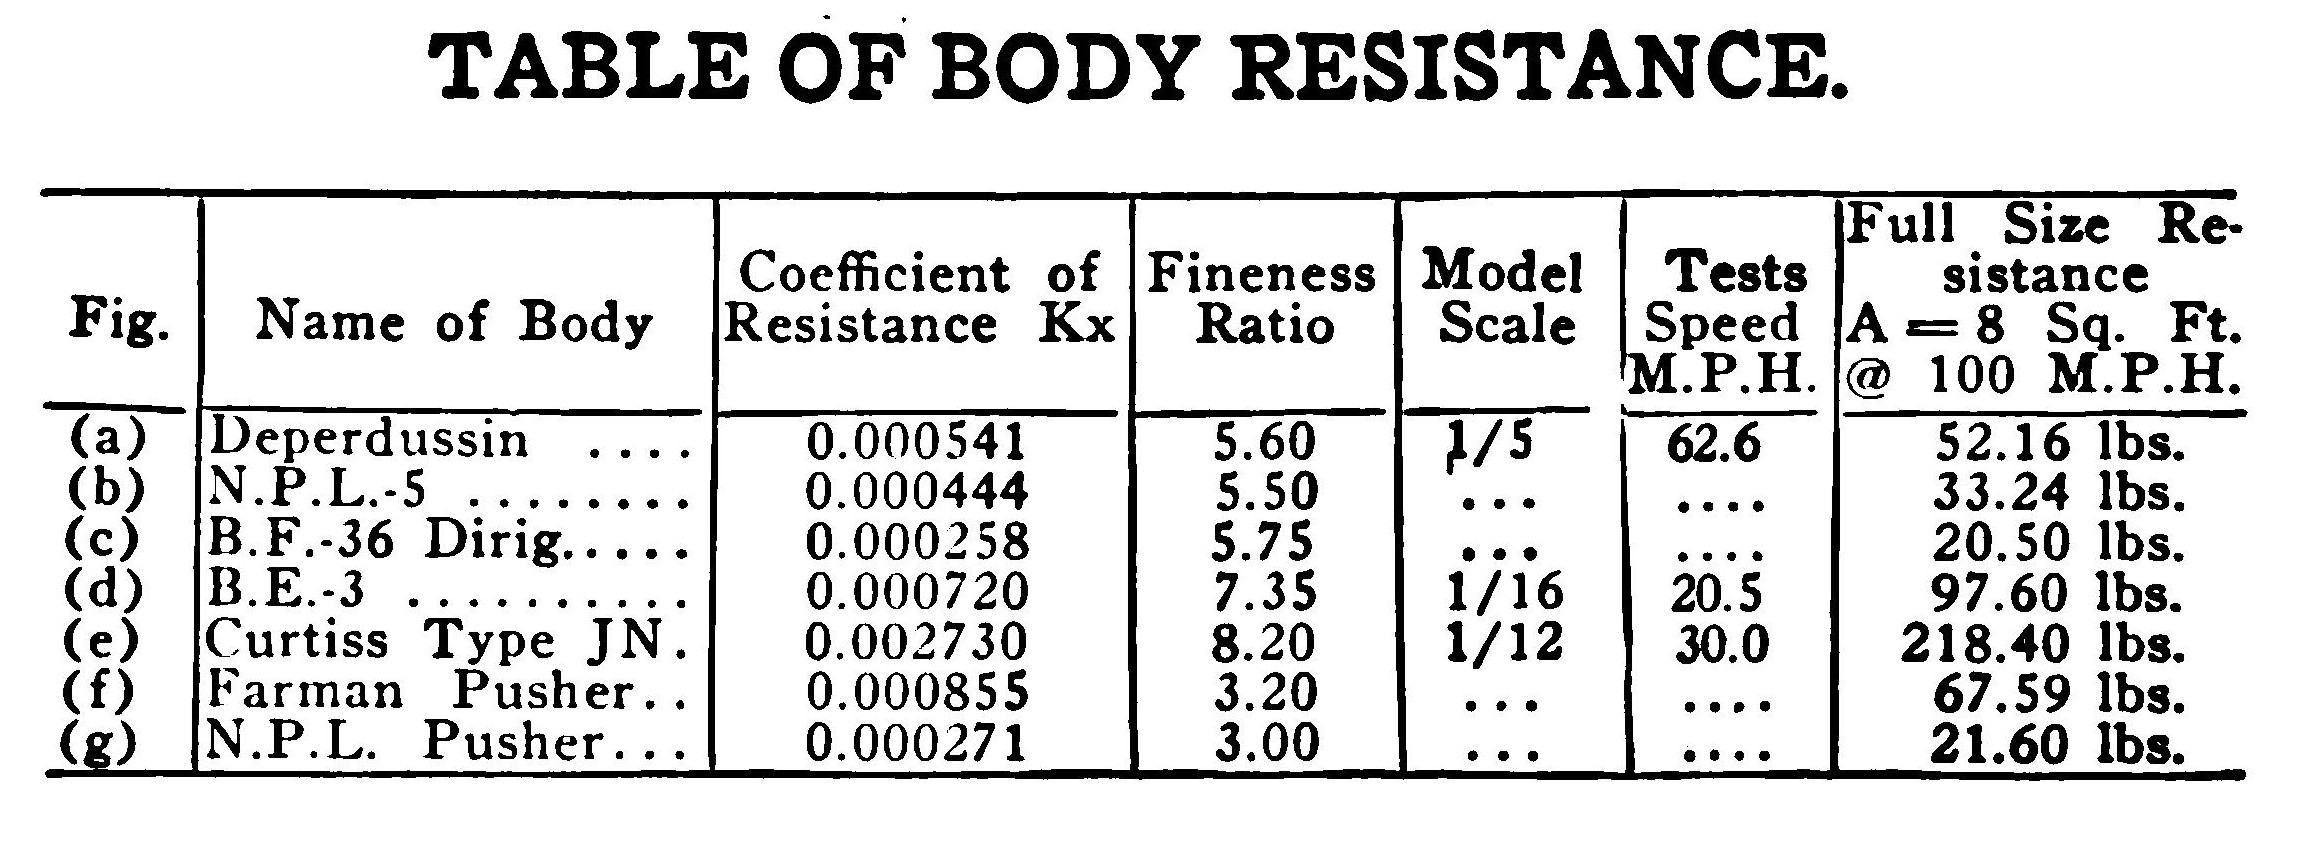 TABLE OF BODY RESISTANCE